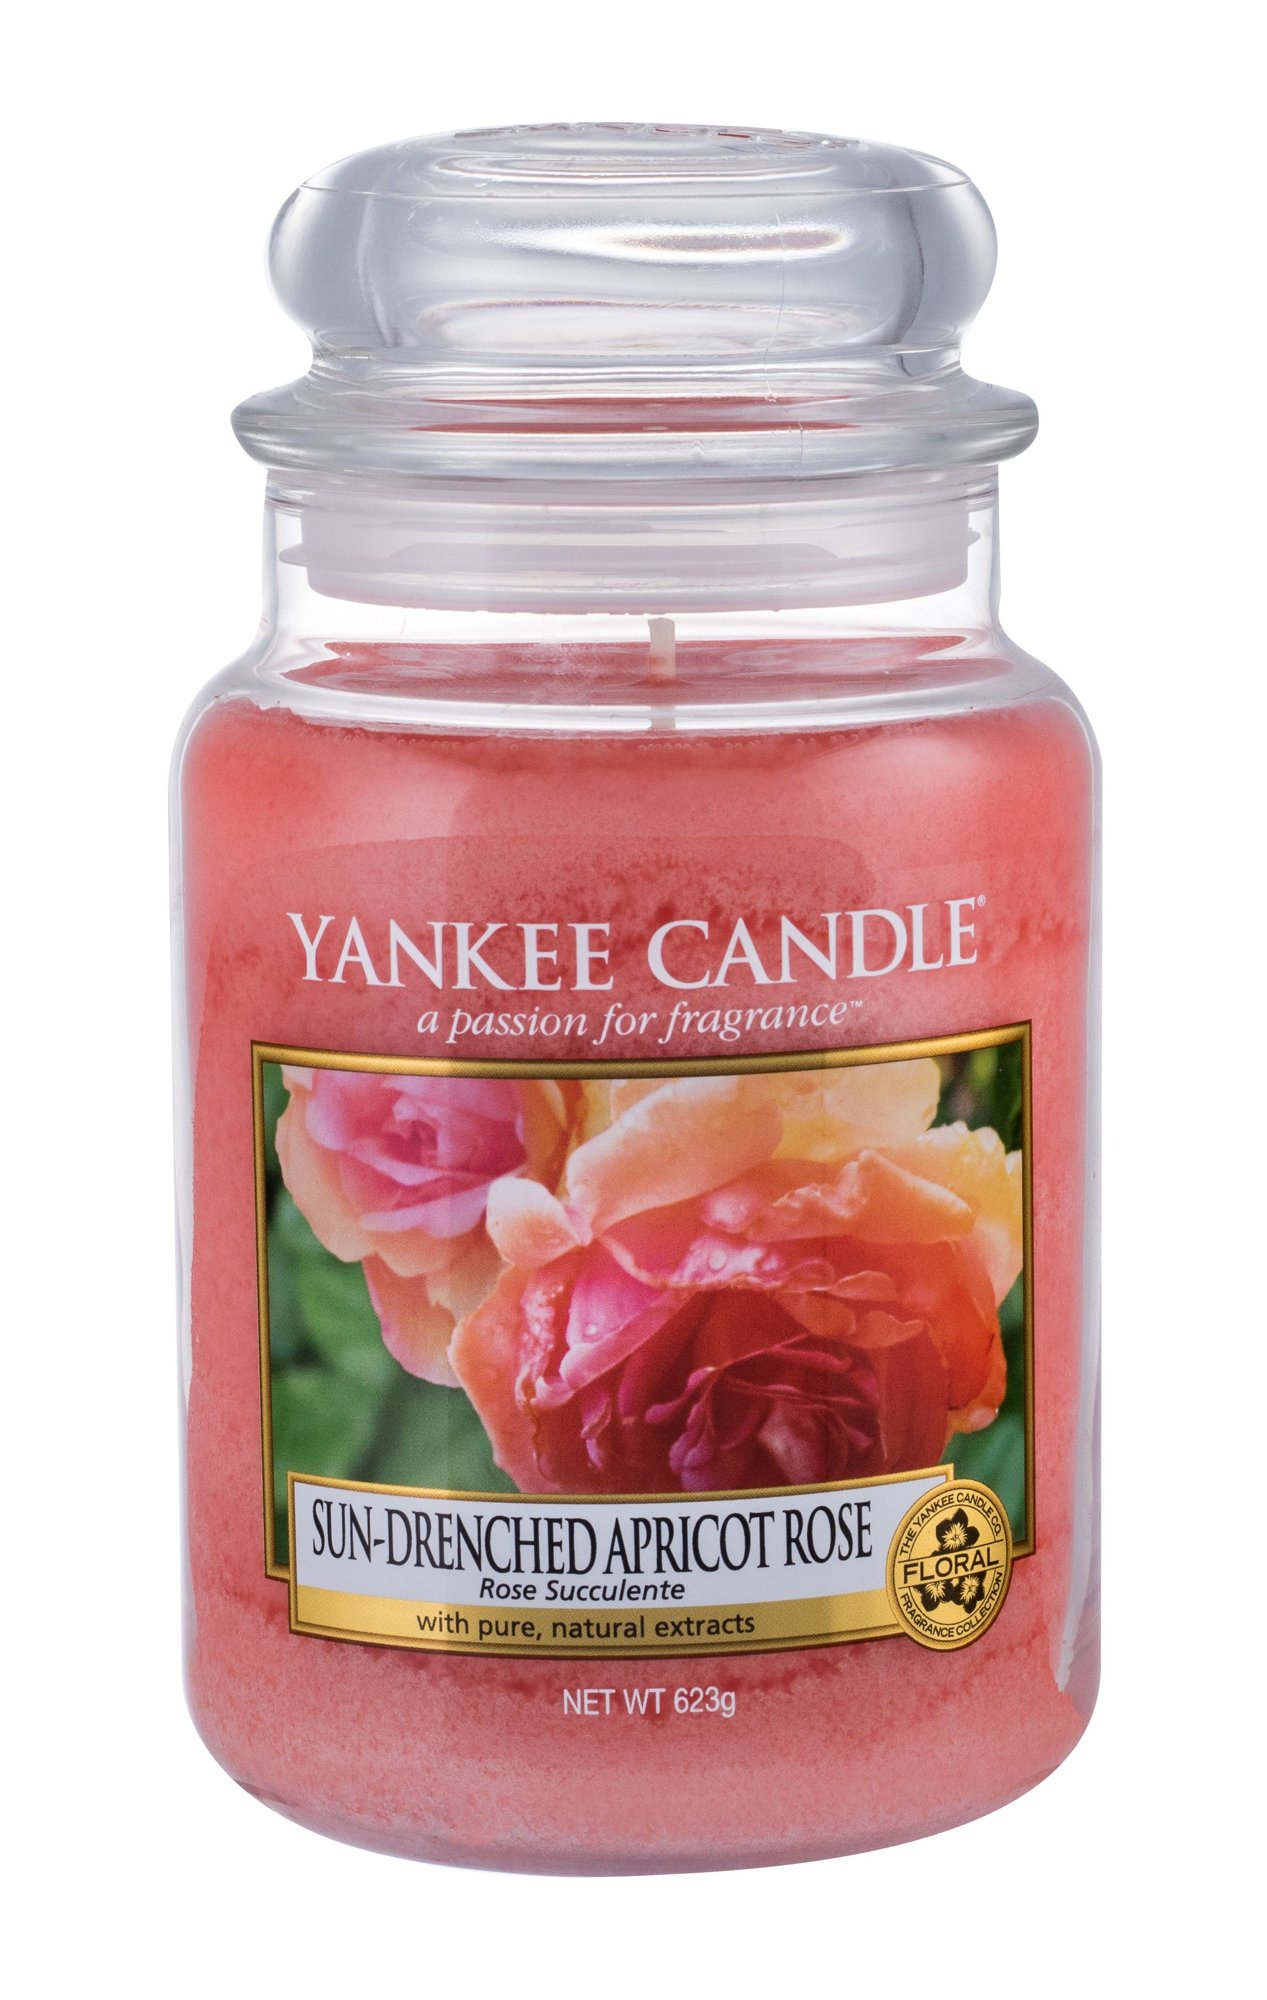 Yankee Candle Sun-Drenched Apricot Rose 623g Kvepalai Unisex Scented Candle